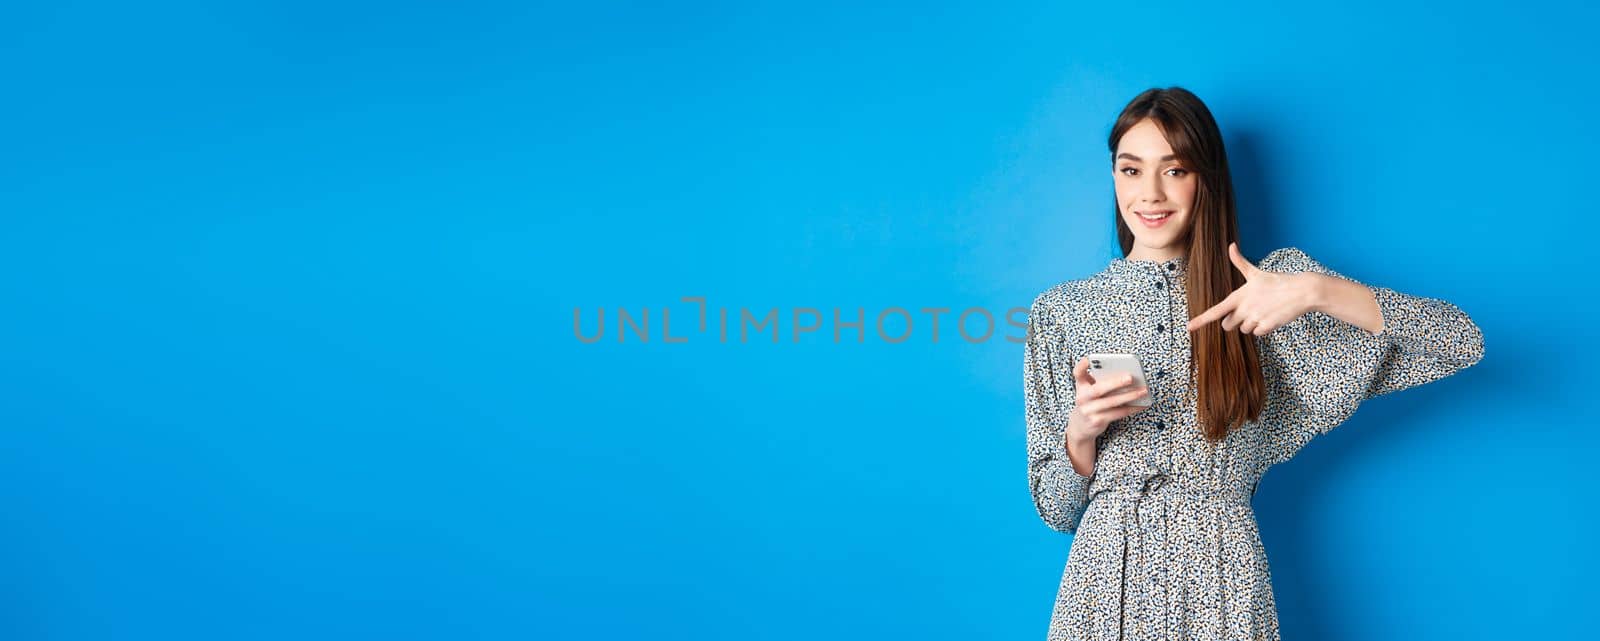 Stylish caucasian woman in dress, pointing at smartphone and smiling, showing online promo, standing on blue background.